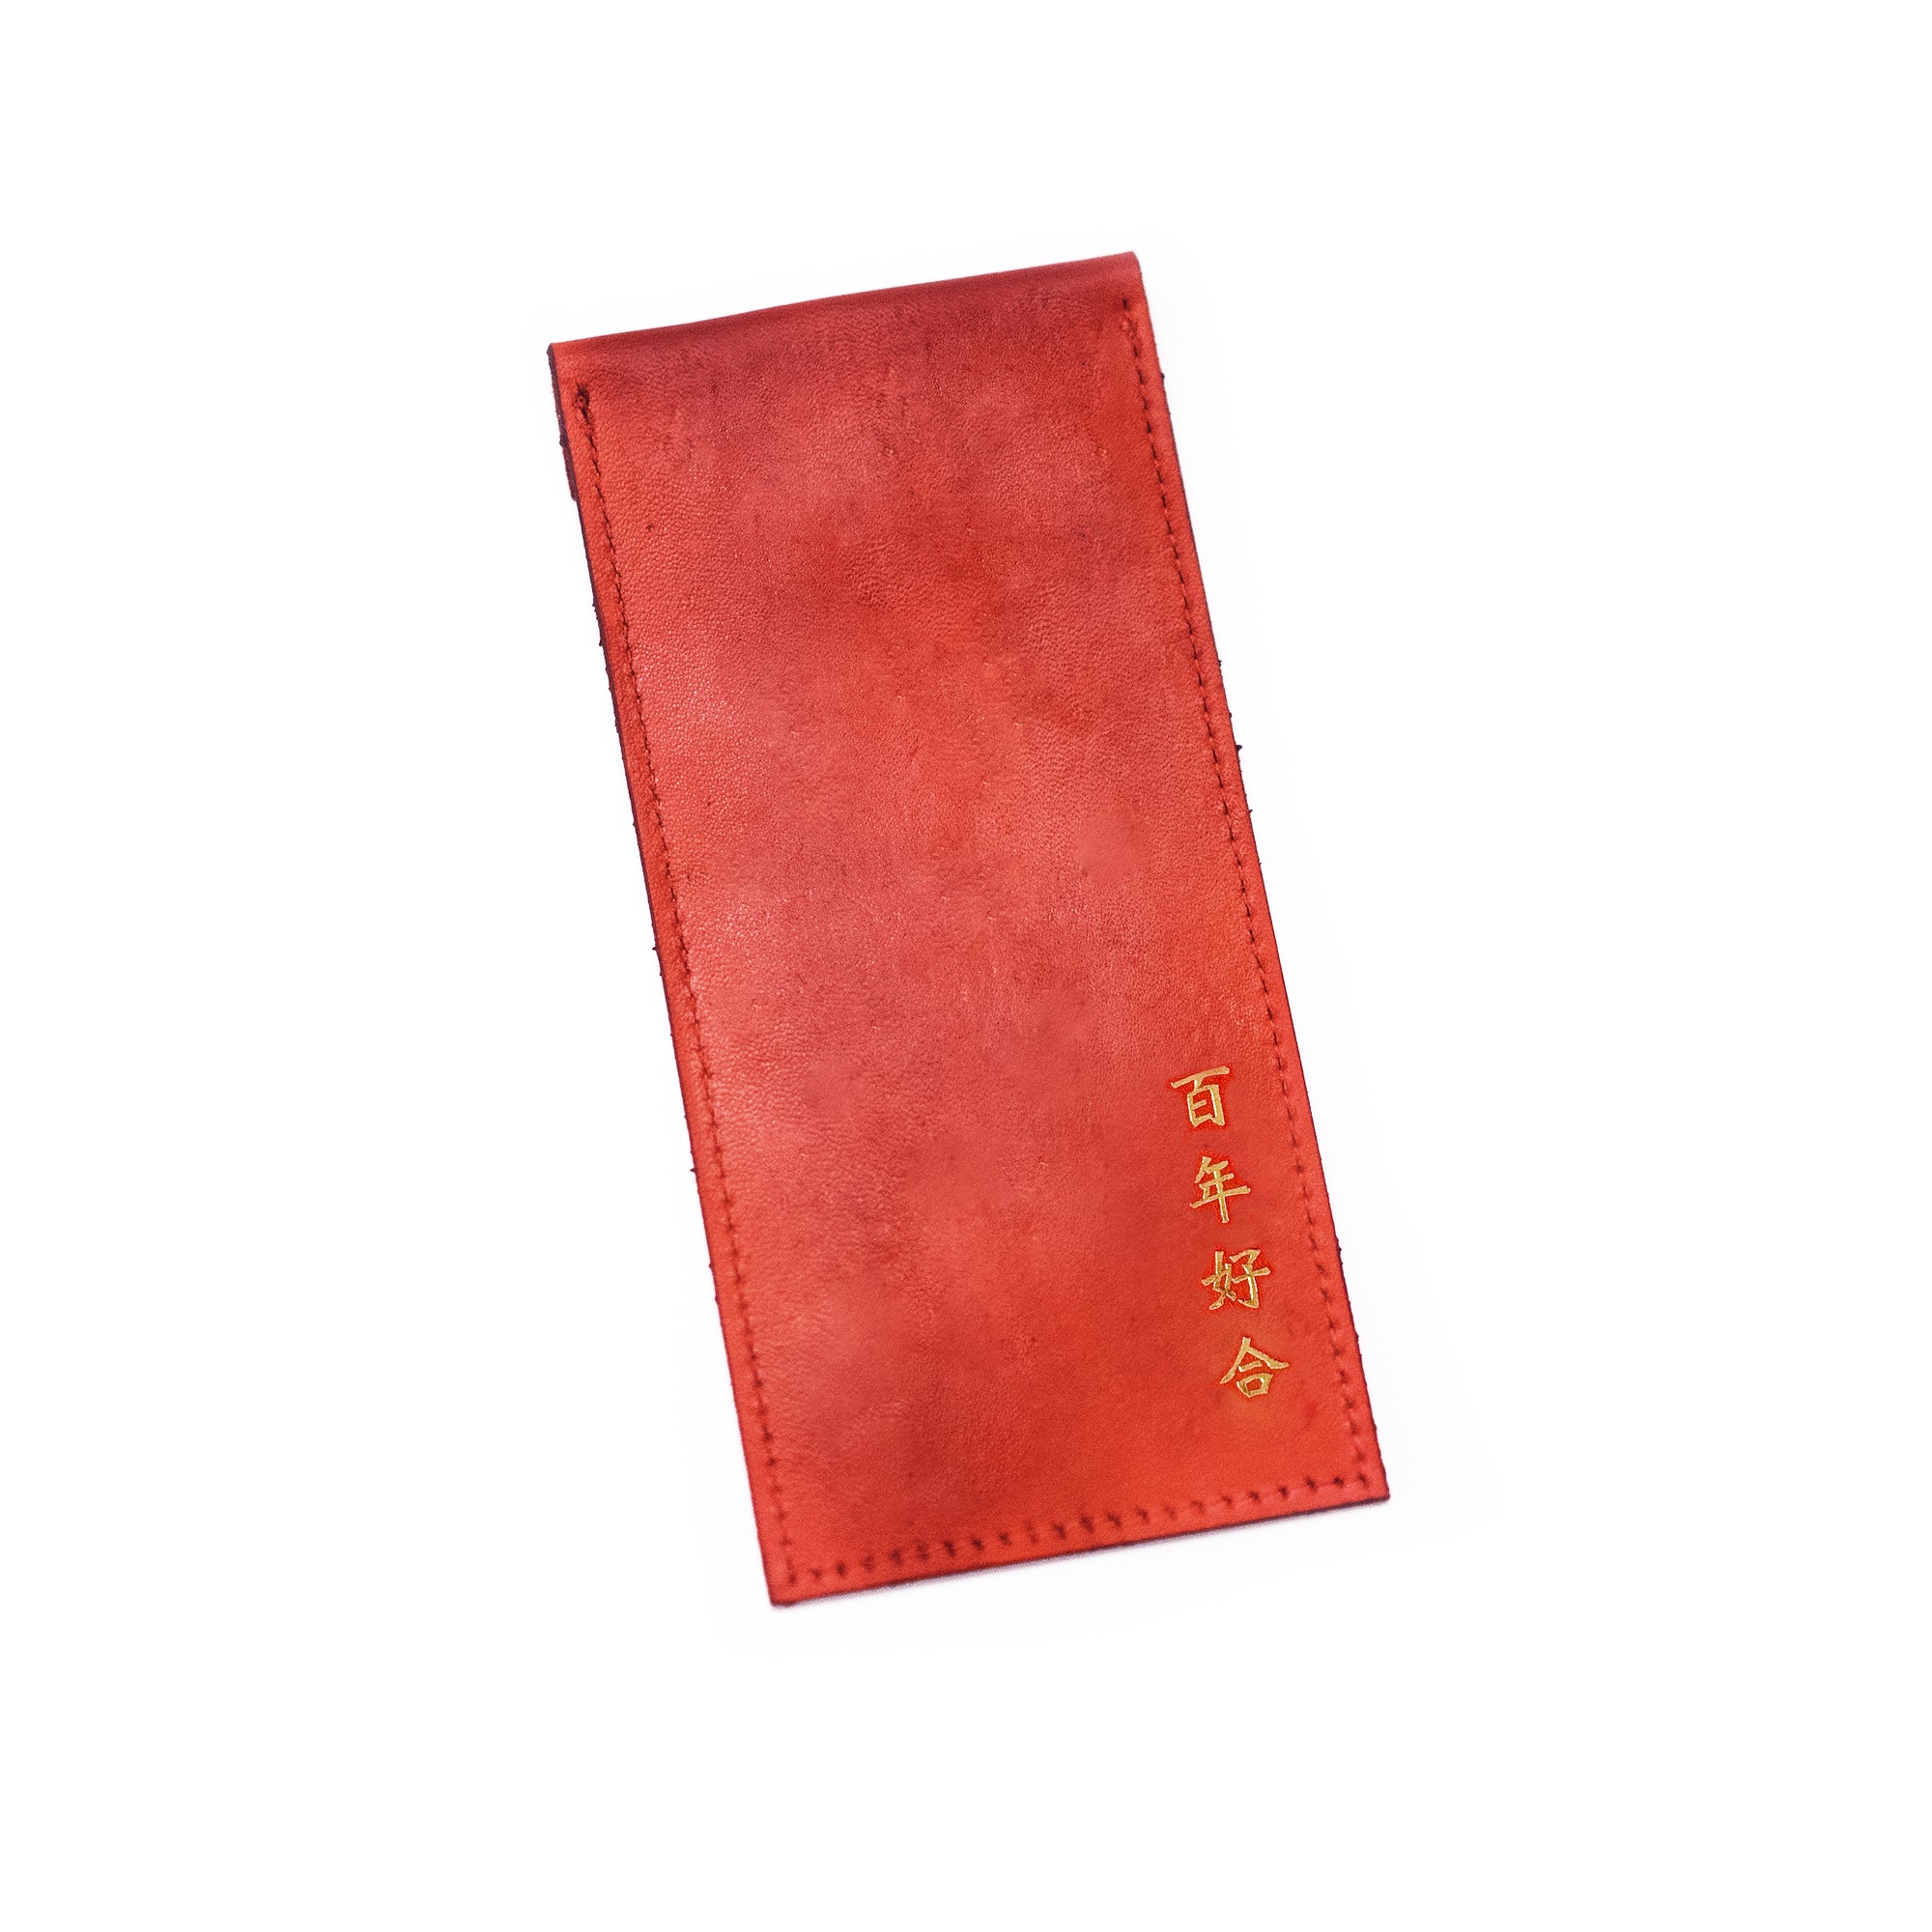 Anyone remember when LV used to give out leather red envelope